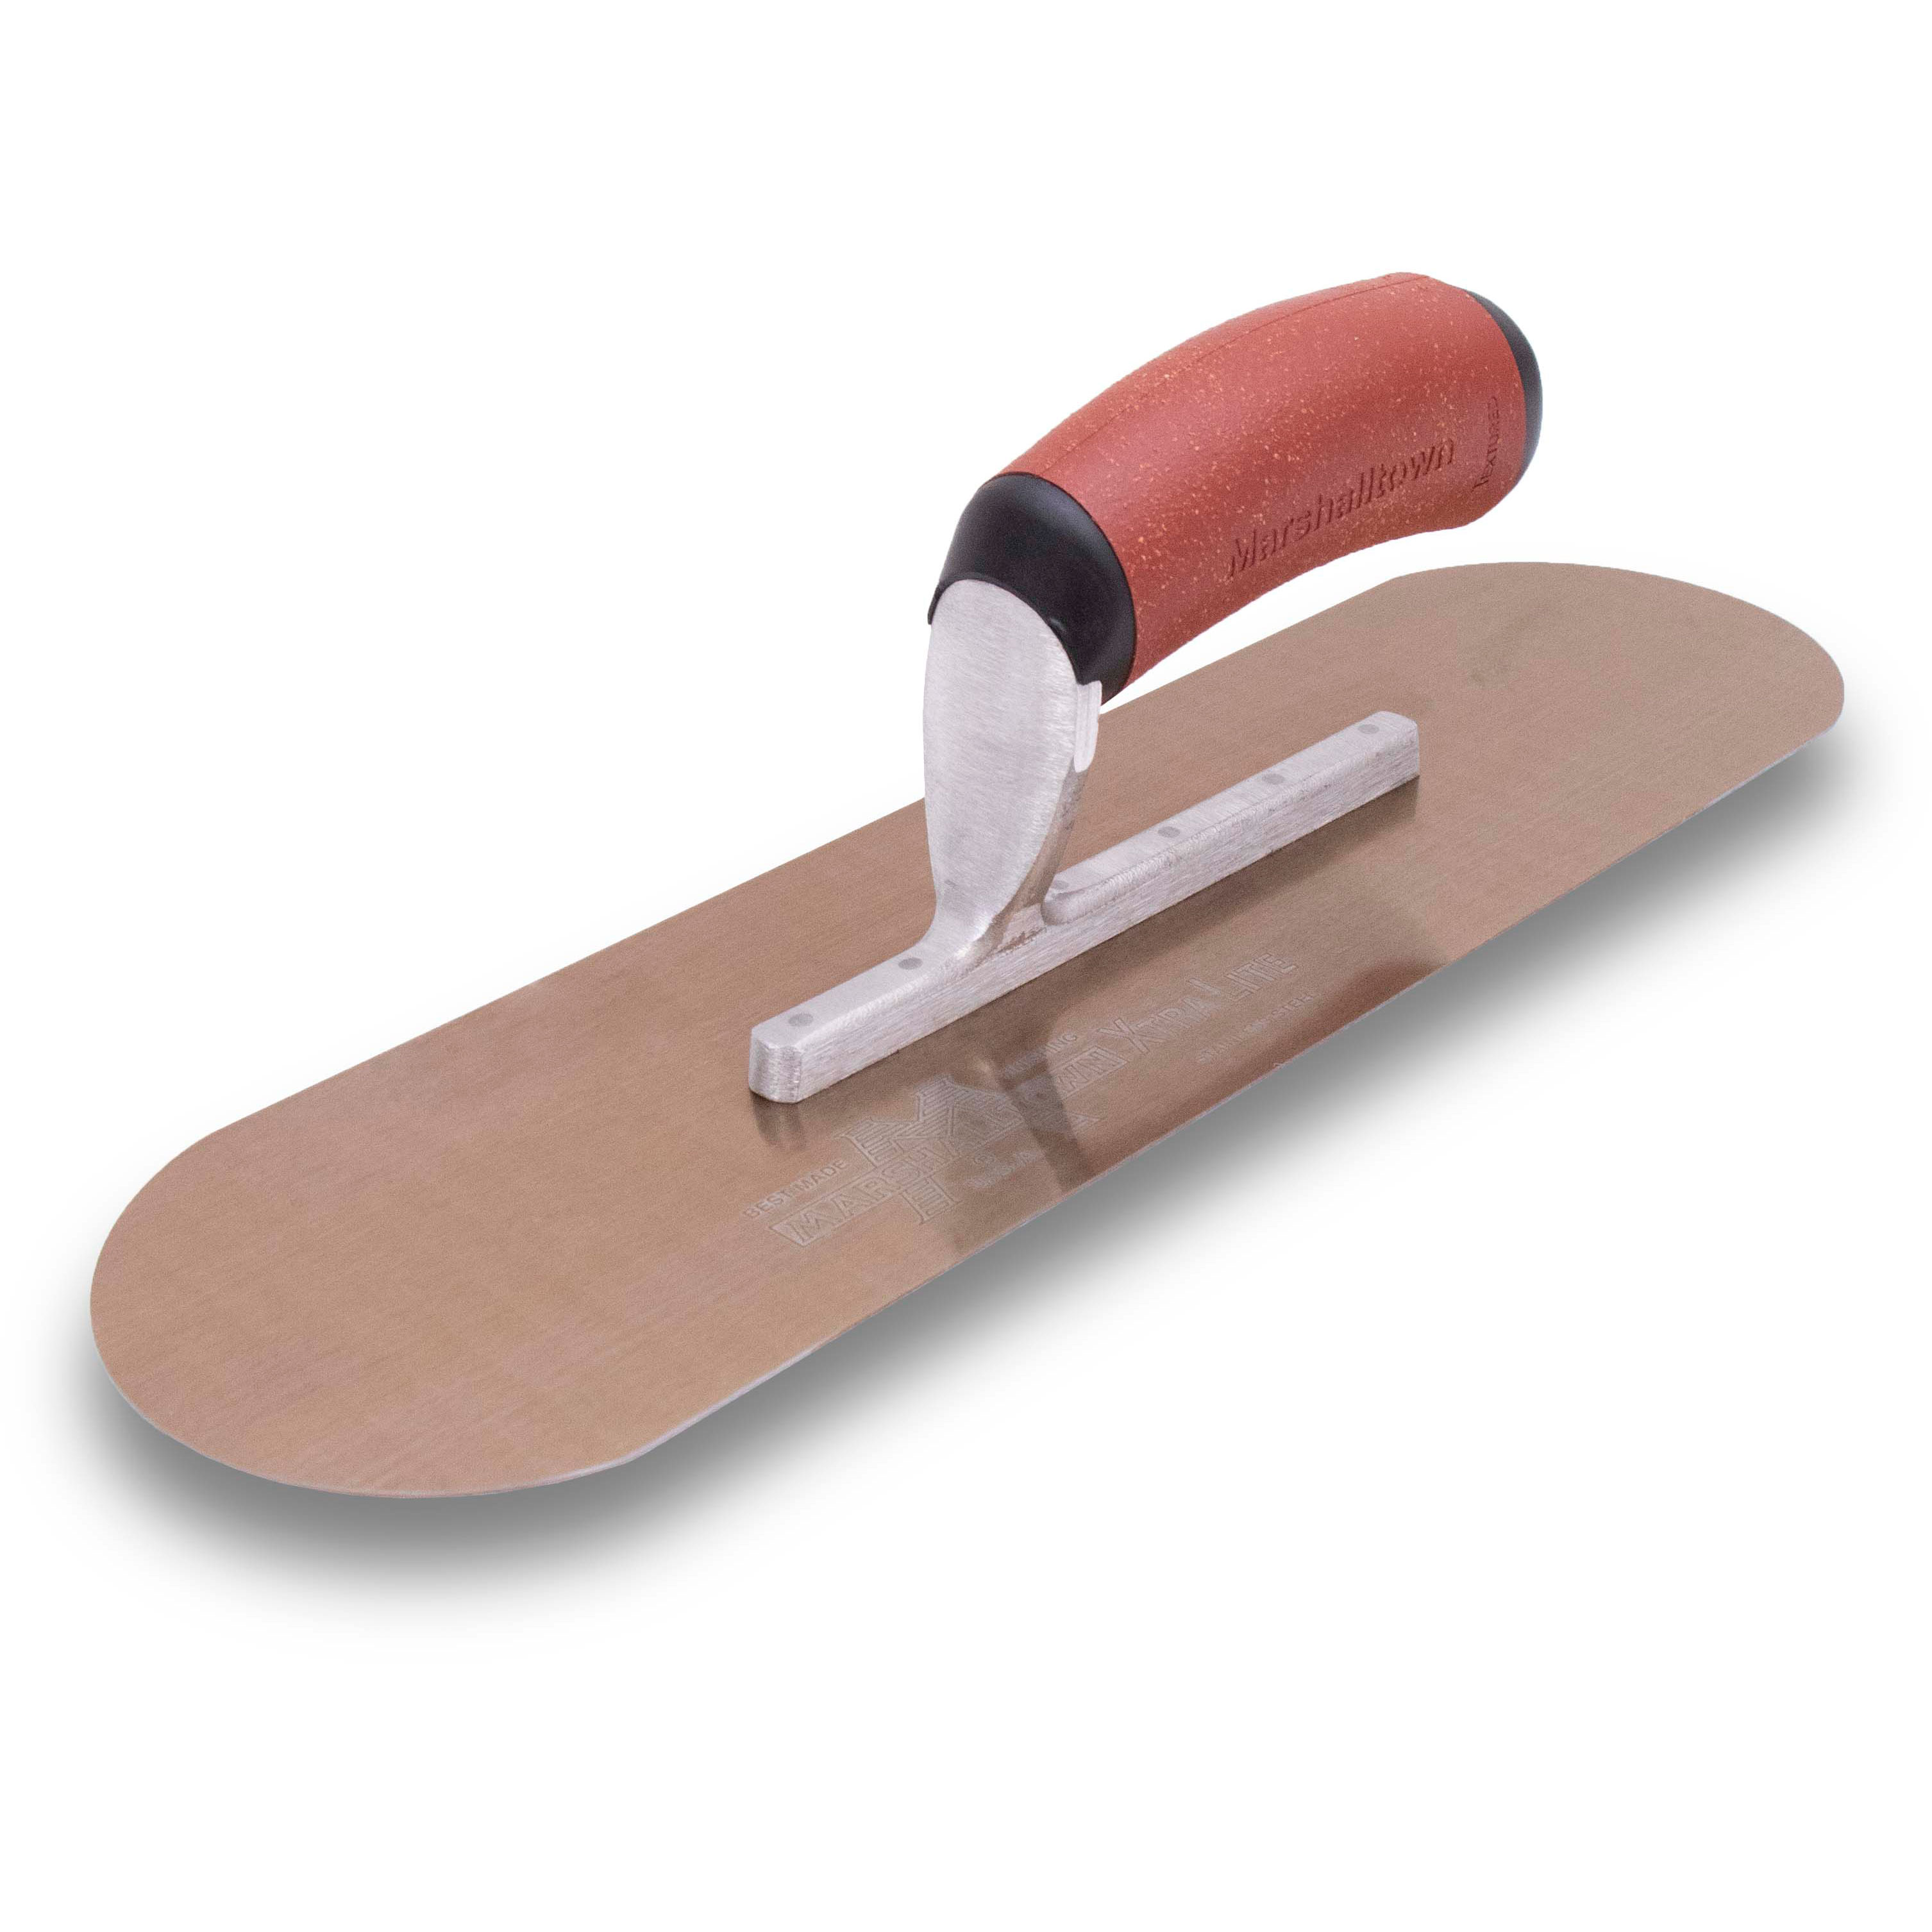 Marshalltown SP14GSDC 14in x 4in Golden Stainless Steel Pool Trowel with DuraCork Handle SP14GSDC